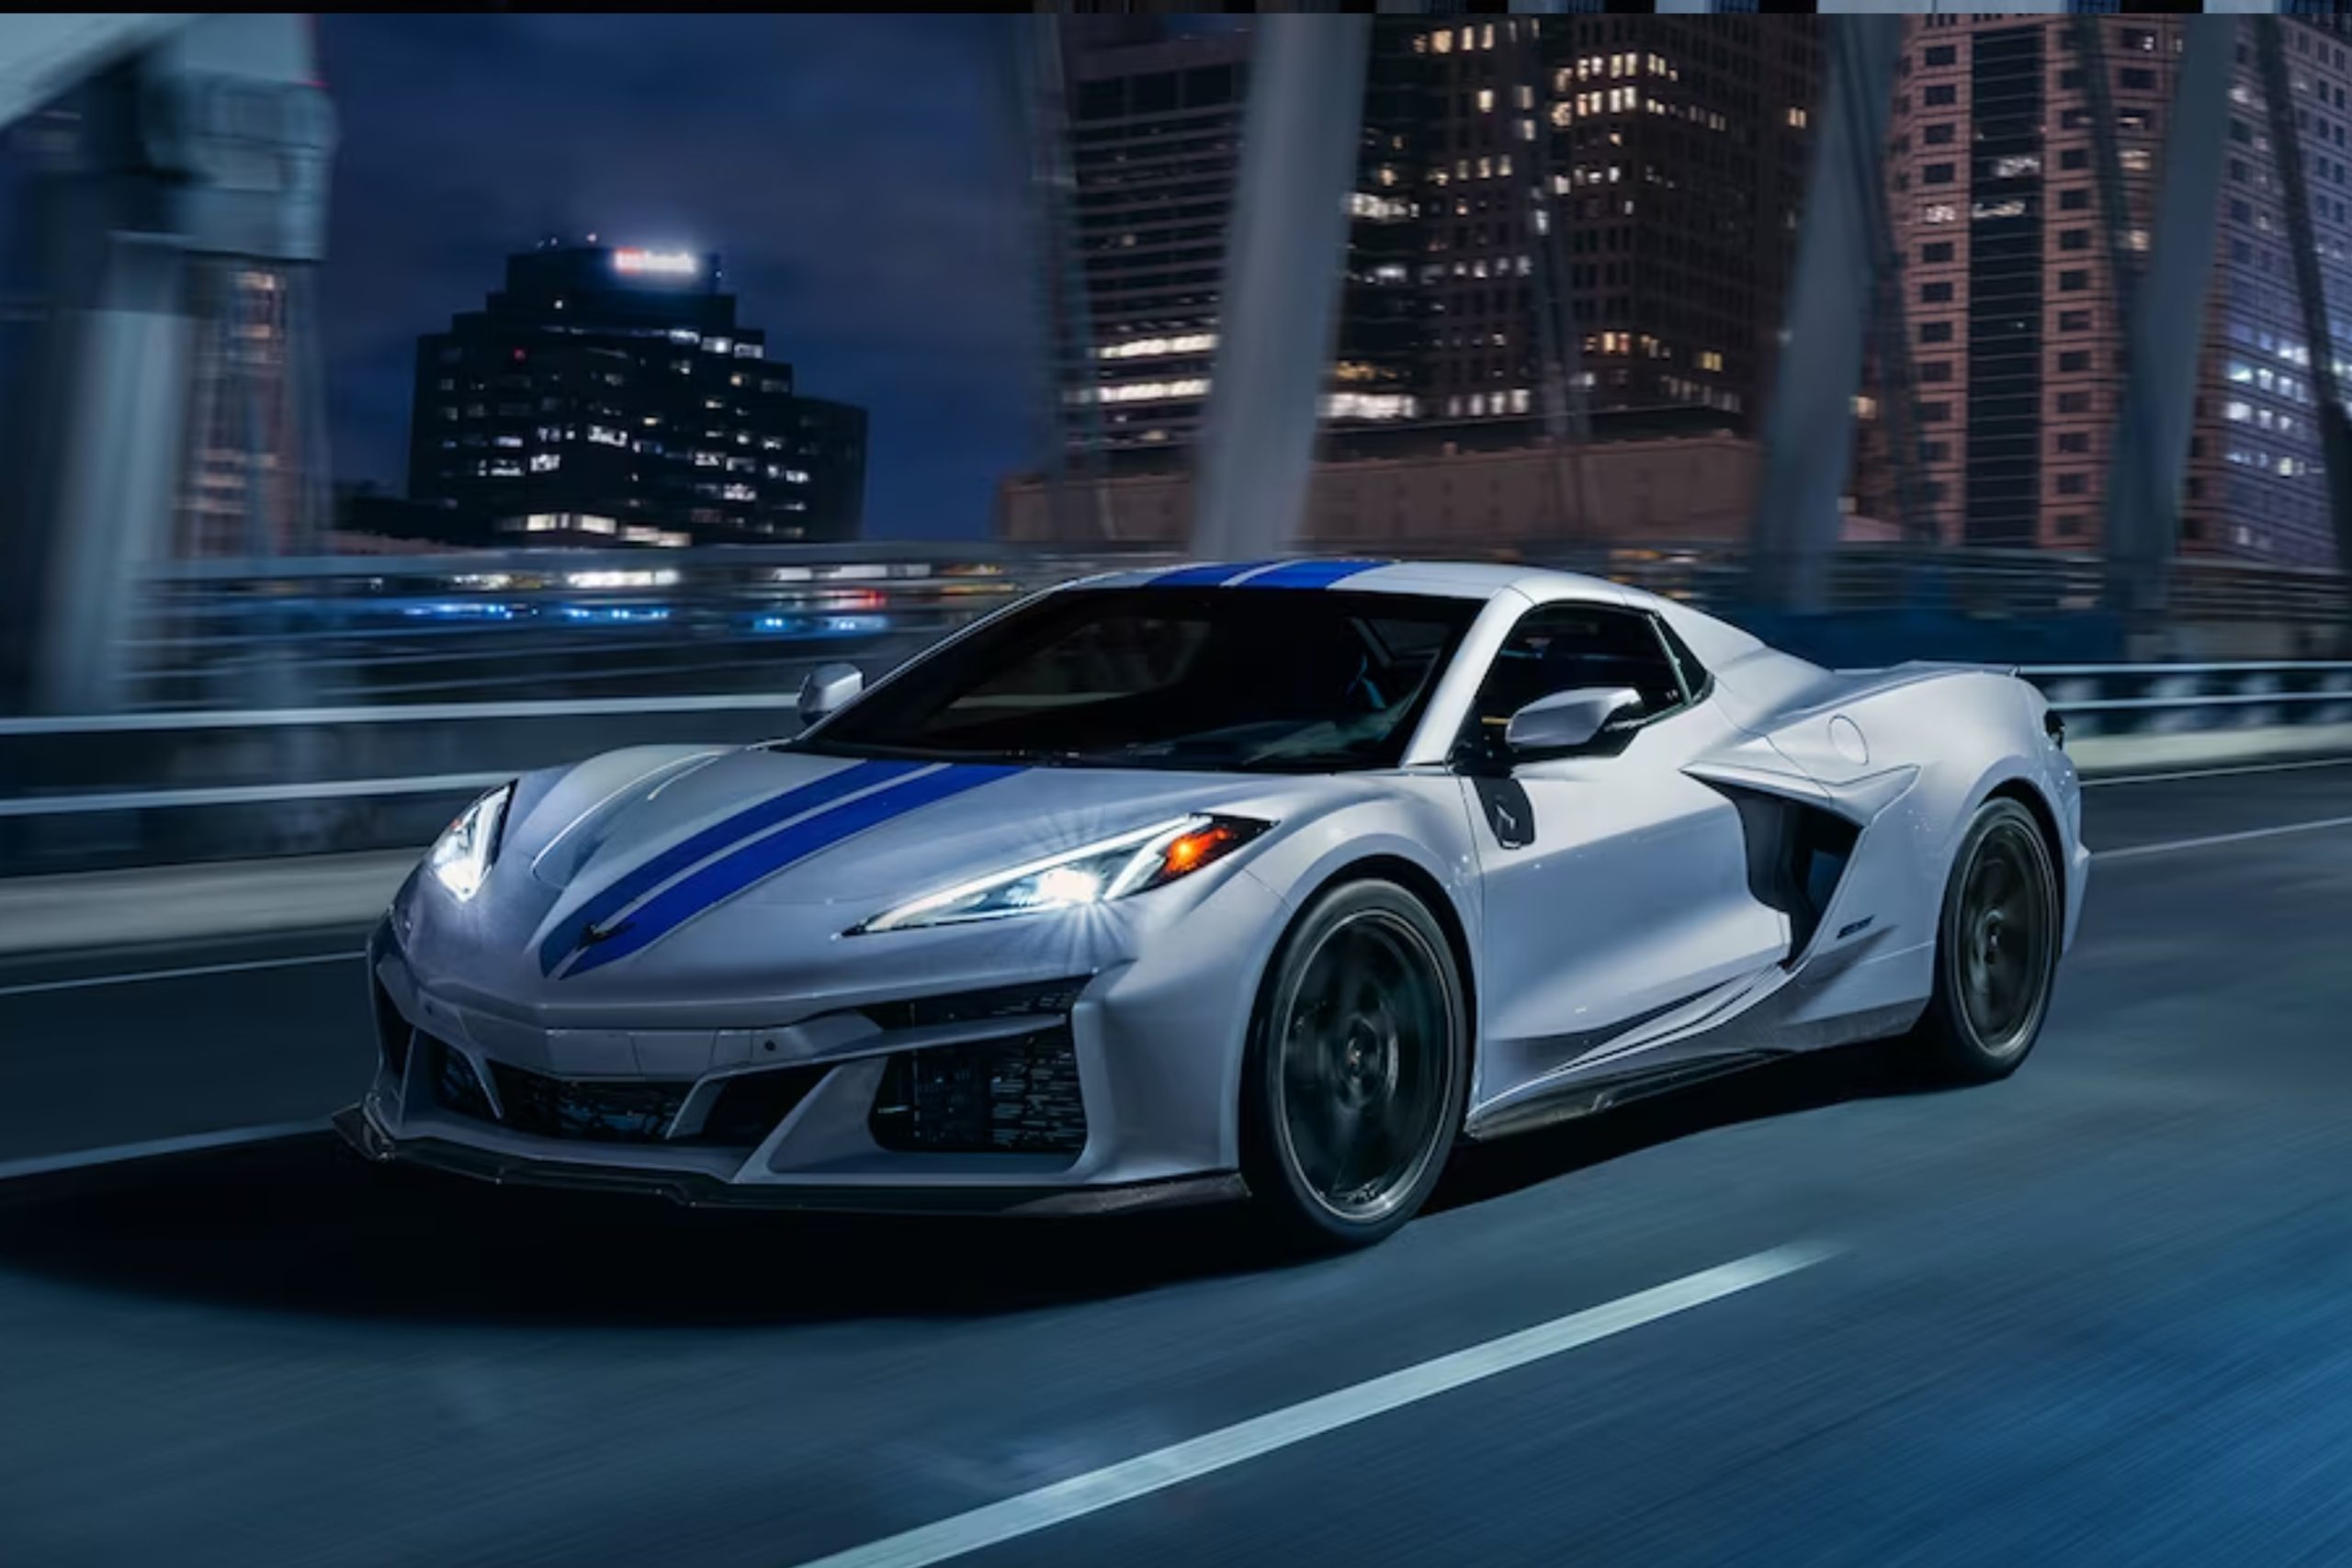 Watch: GM unveiled the new Chevy Corvette E-Ray hybrid sports car with pricing tag at more than $100,000